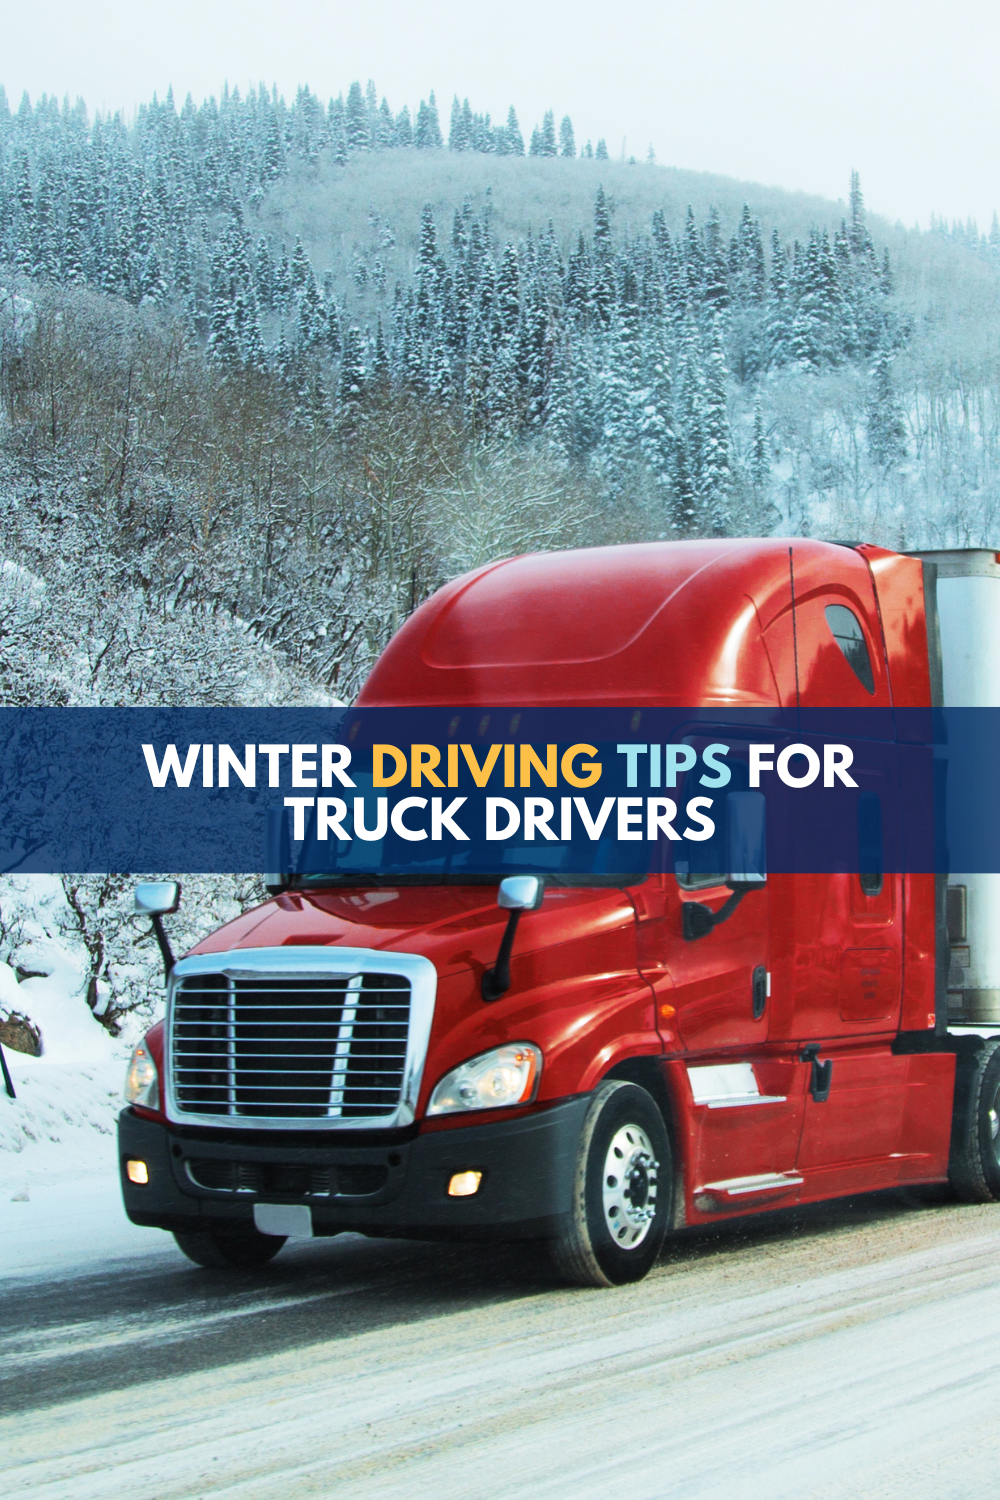 https://www.michiganautolaw.com/wp-content/uploads/2020/01/Winter-Tips-Truck-Drivers-Pinterest.png